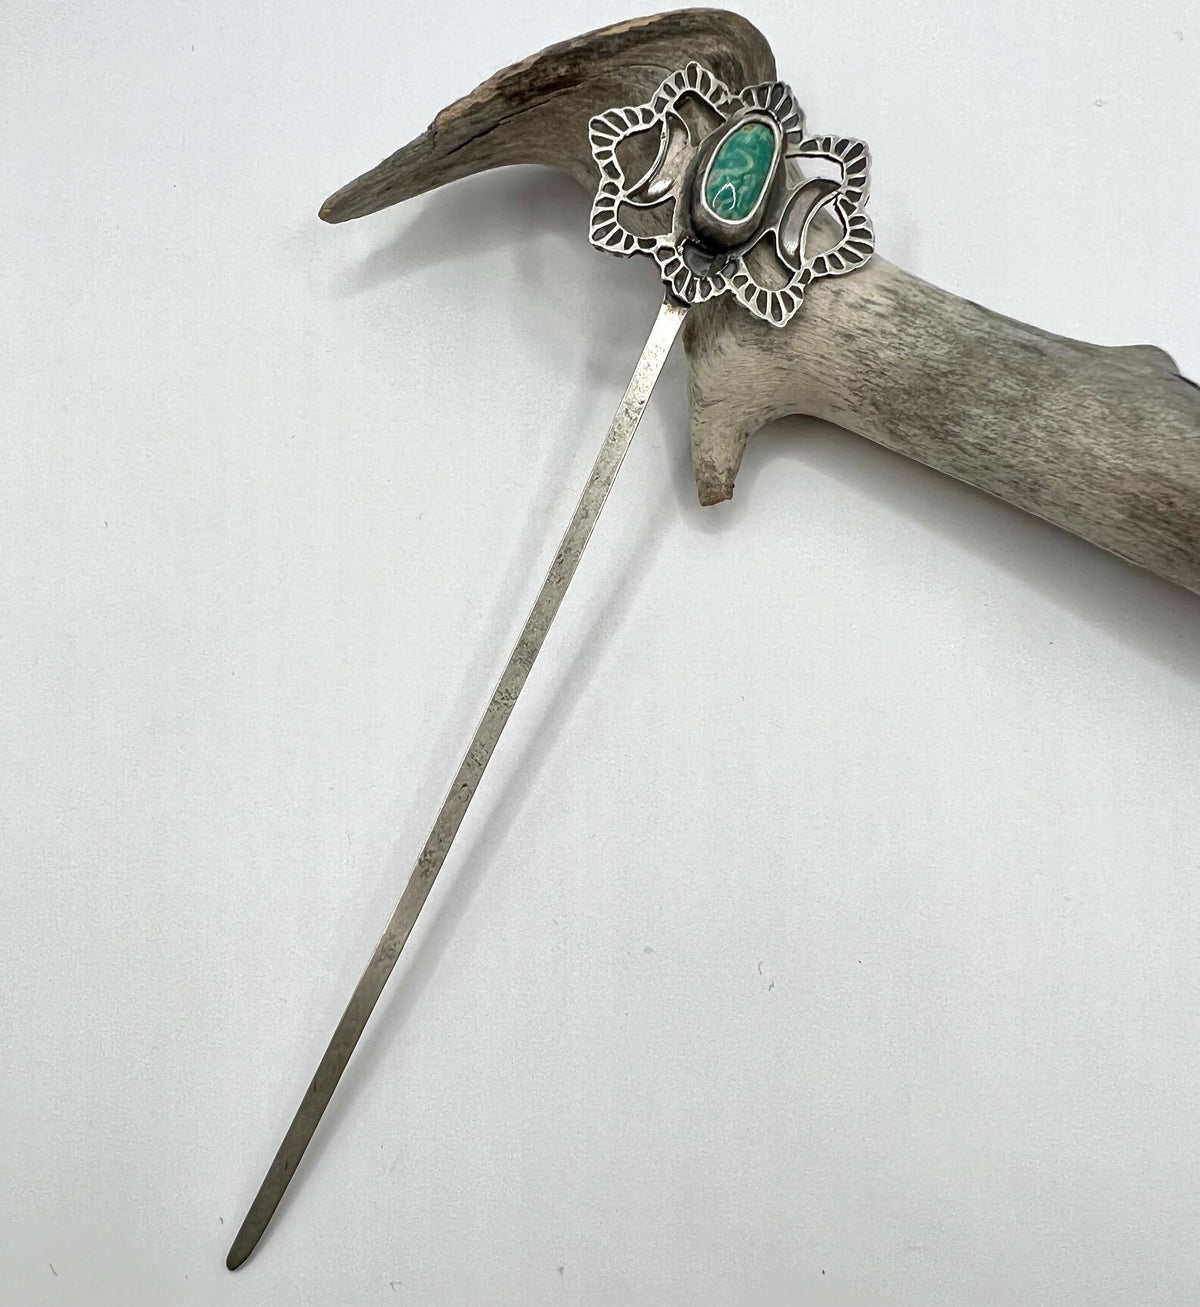 Sweater/ Shawl Pin in Variscite